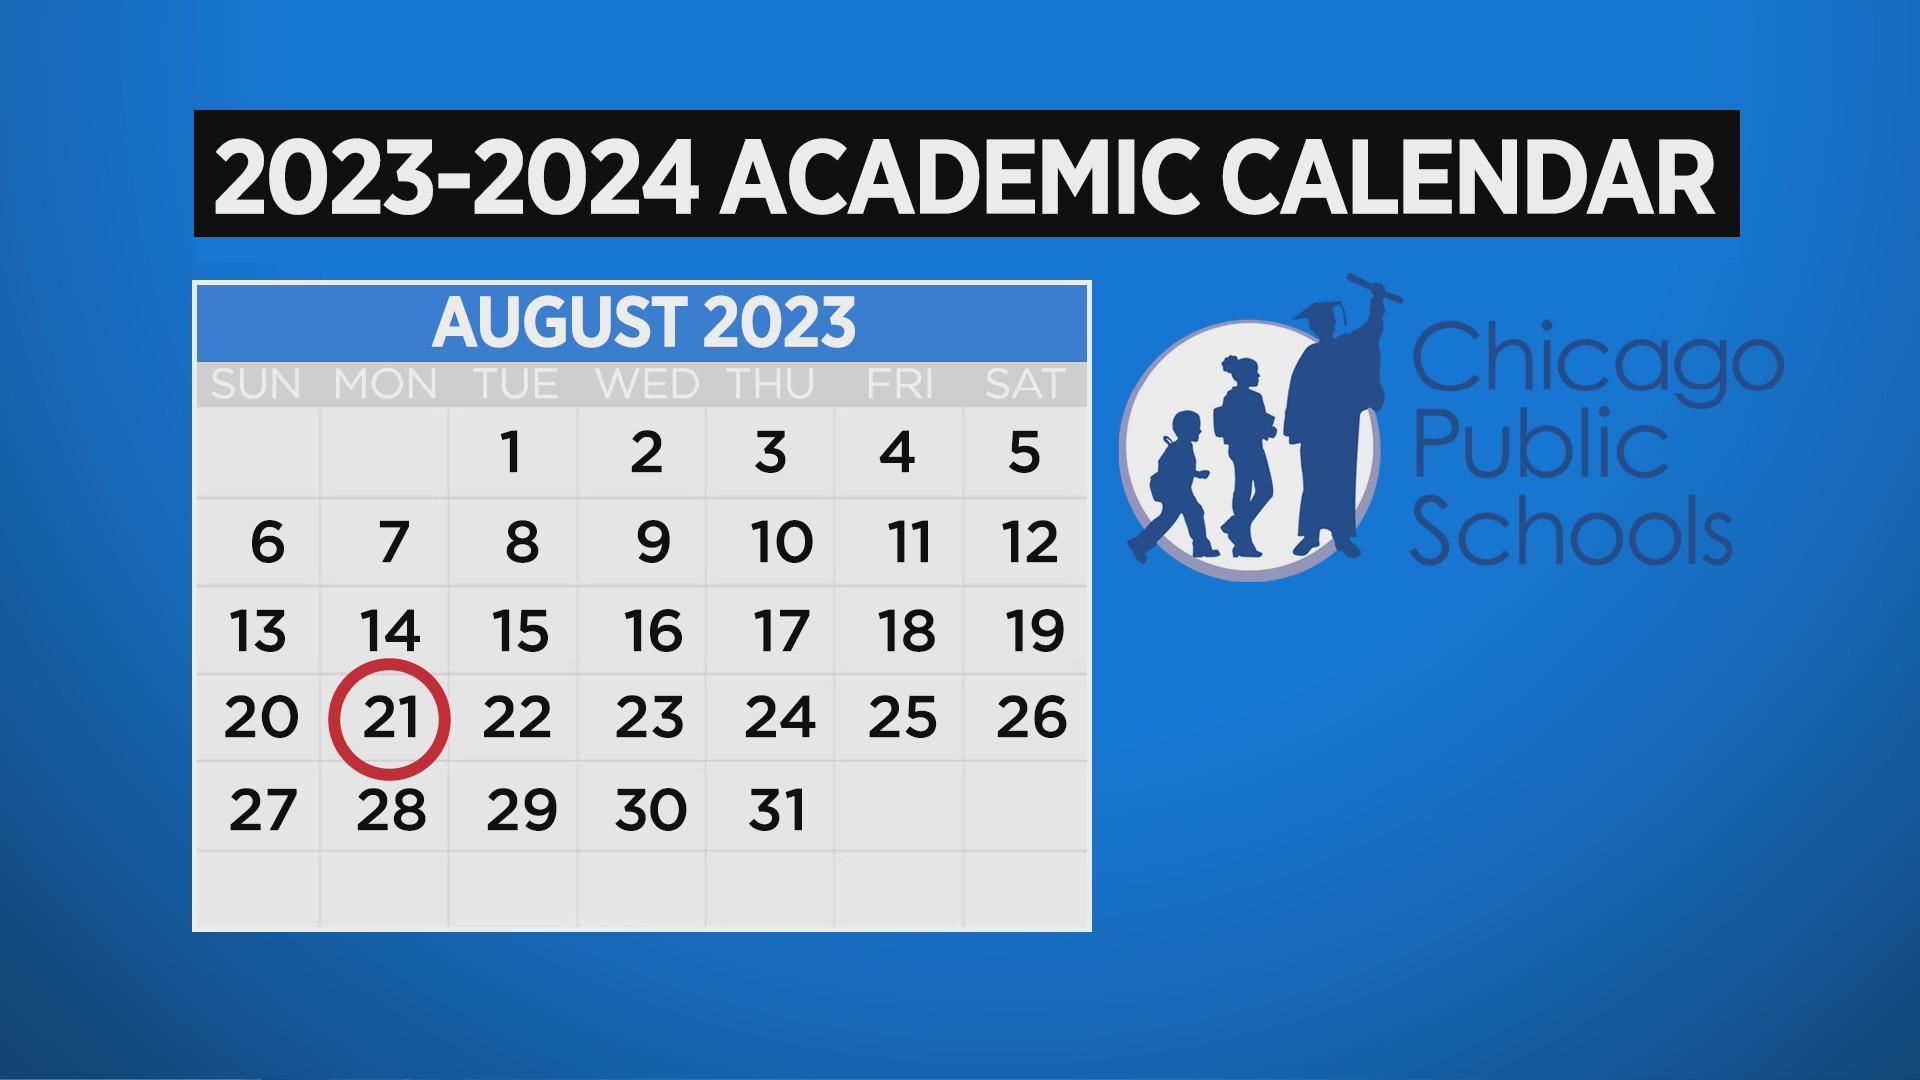 CPS plans Aug. 22 return; proposed 2022-2023 academic calendar has earliest  start in recent memory - Chicago Sun-Times